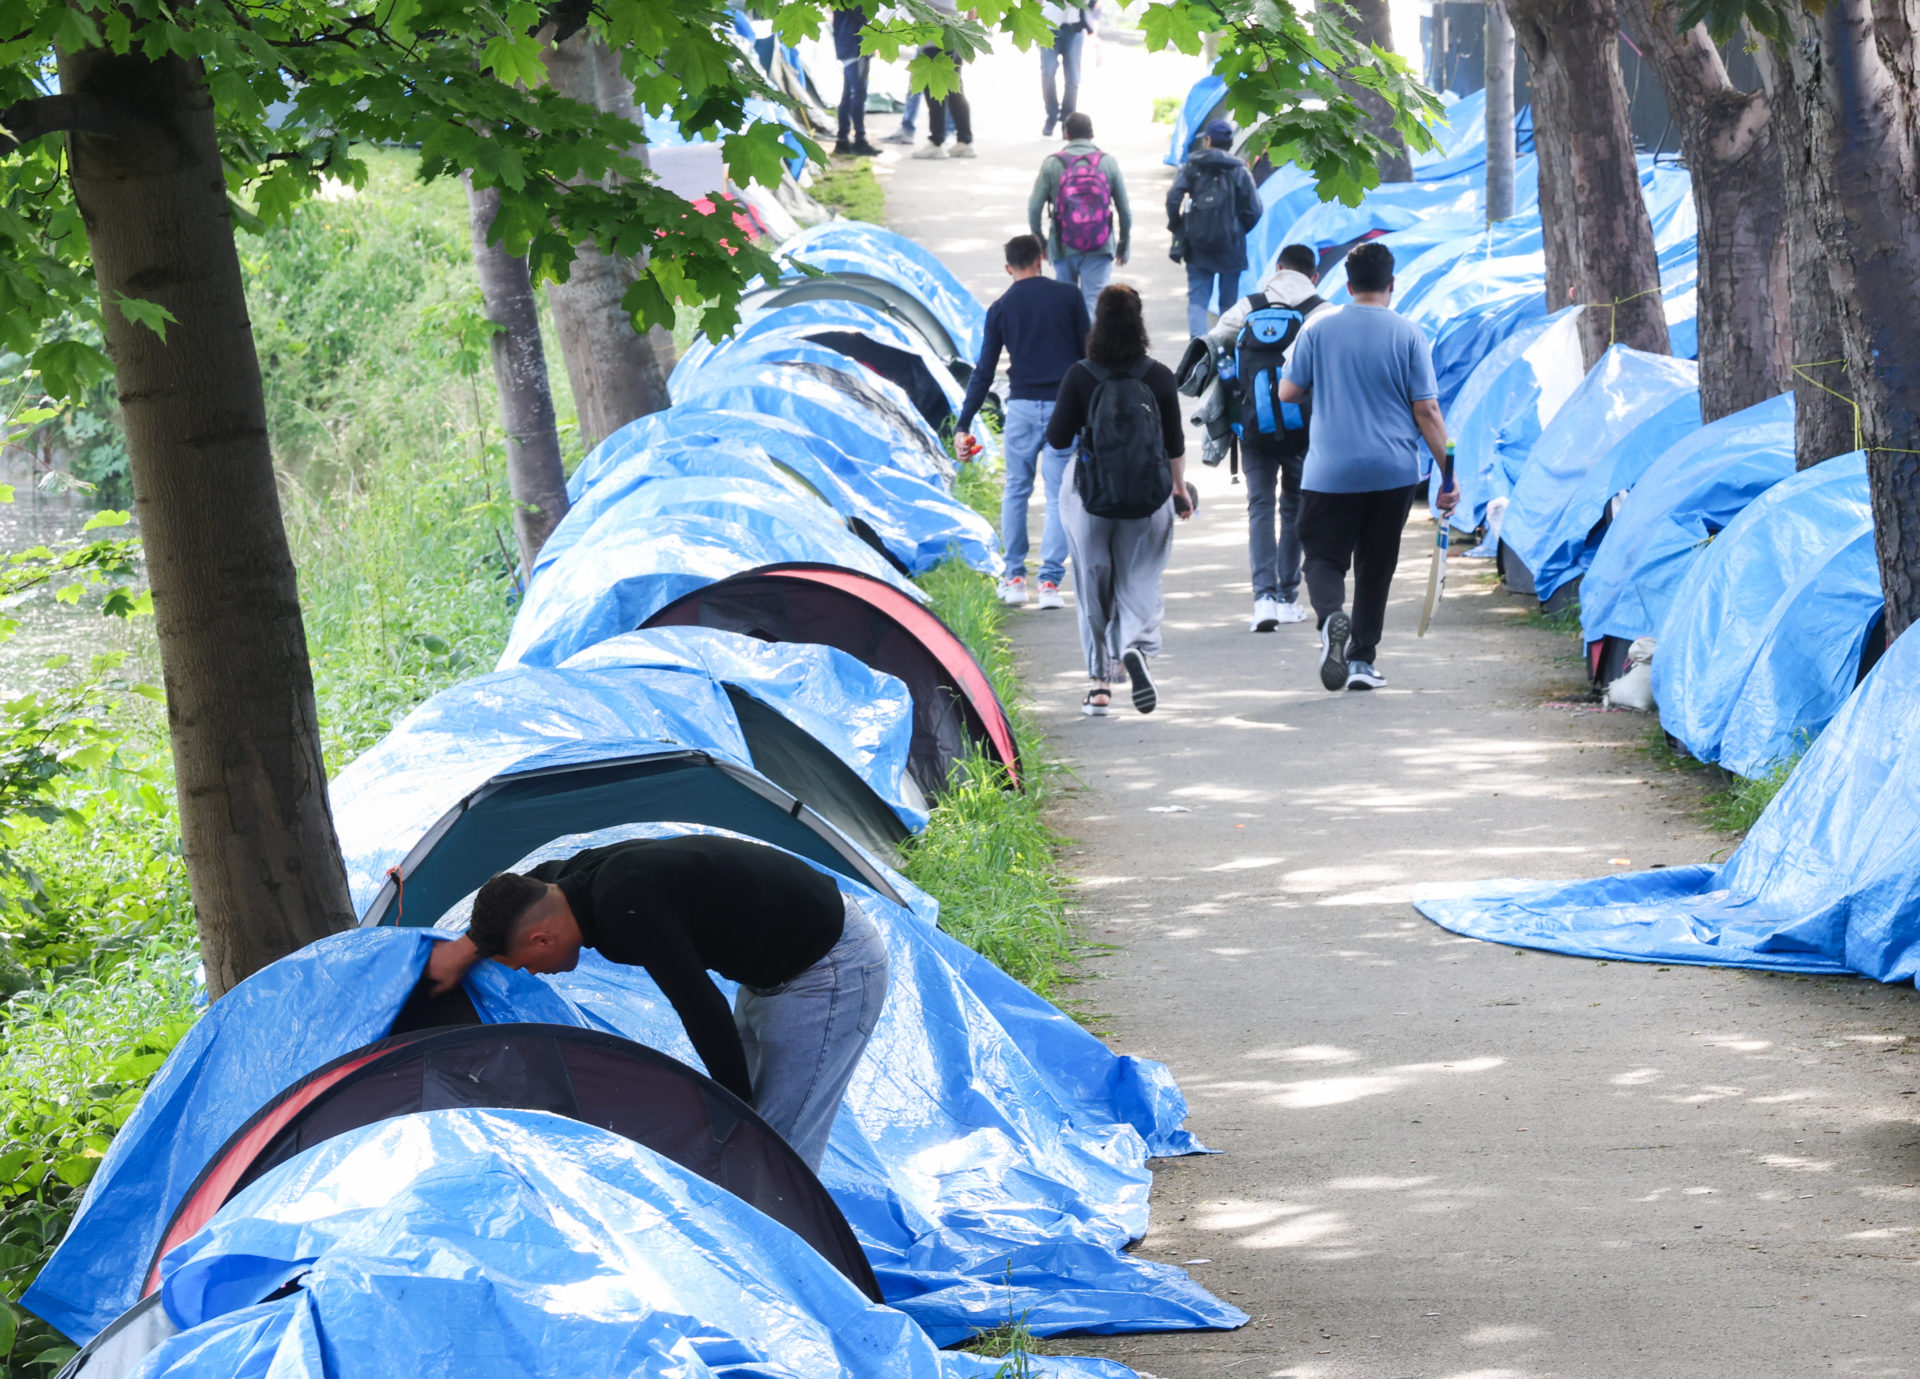 Members of the public pass tents belonging to asylum seekers along the Grand Canal, as news reports indicate the number of tents has now increased to above 100. Photograph: Sasko Lazarov / © RollingNews.ie